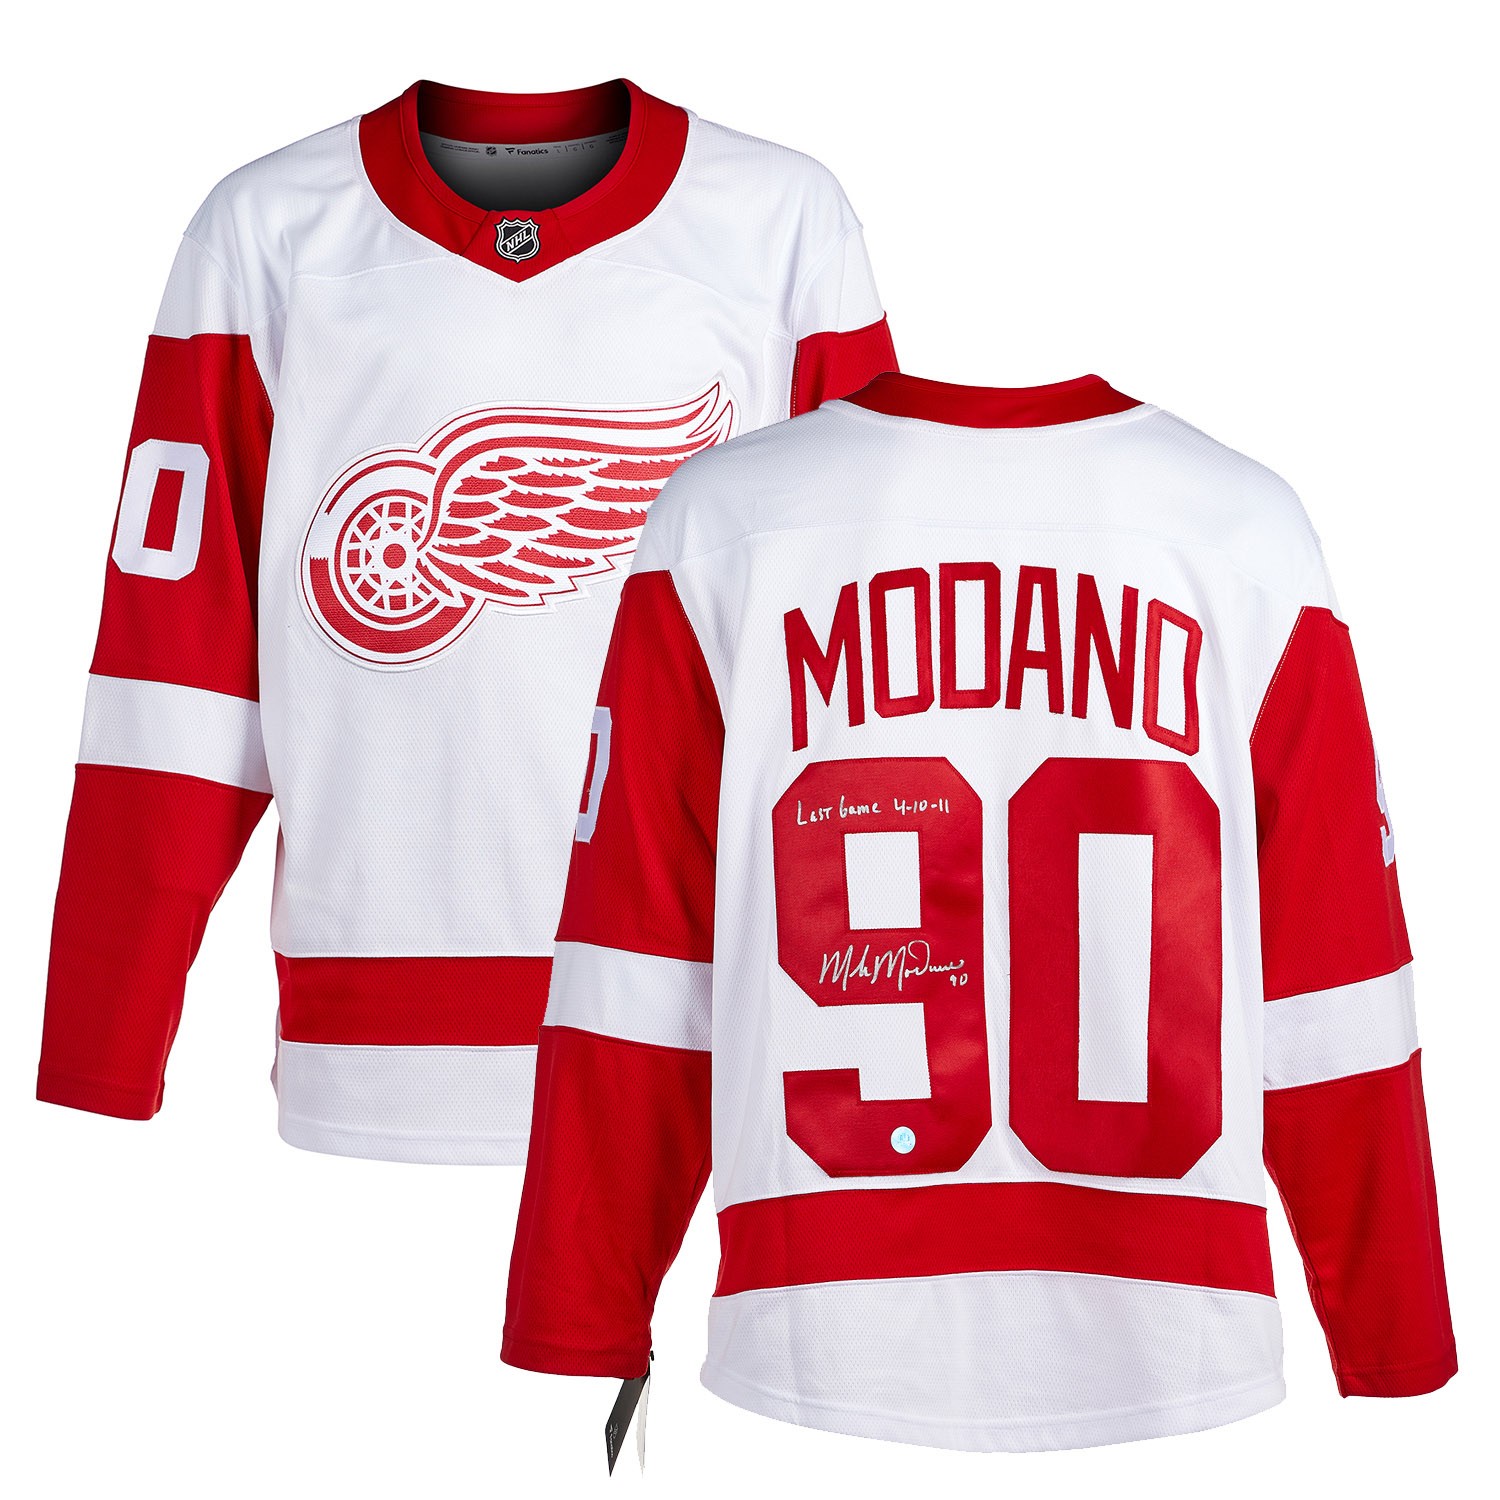 Detroit Red Wings Jerseys, Red Wings Hockey Jerseys, Authentic Red